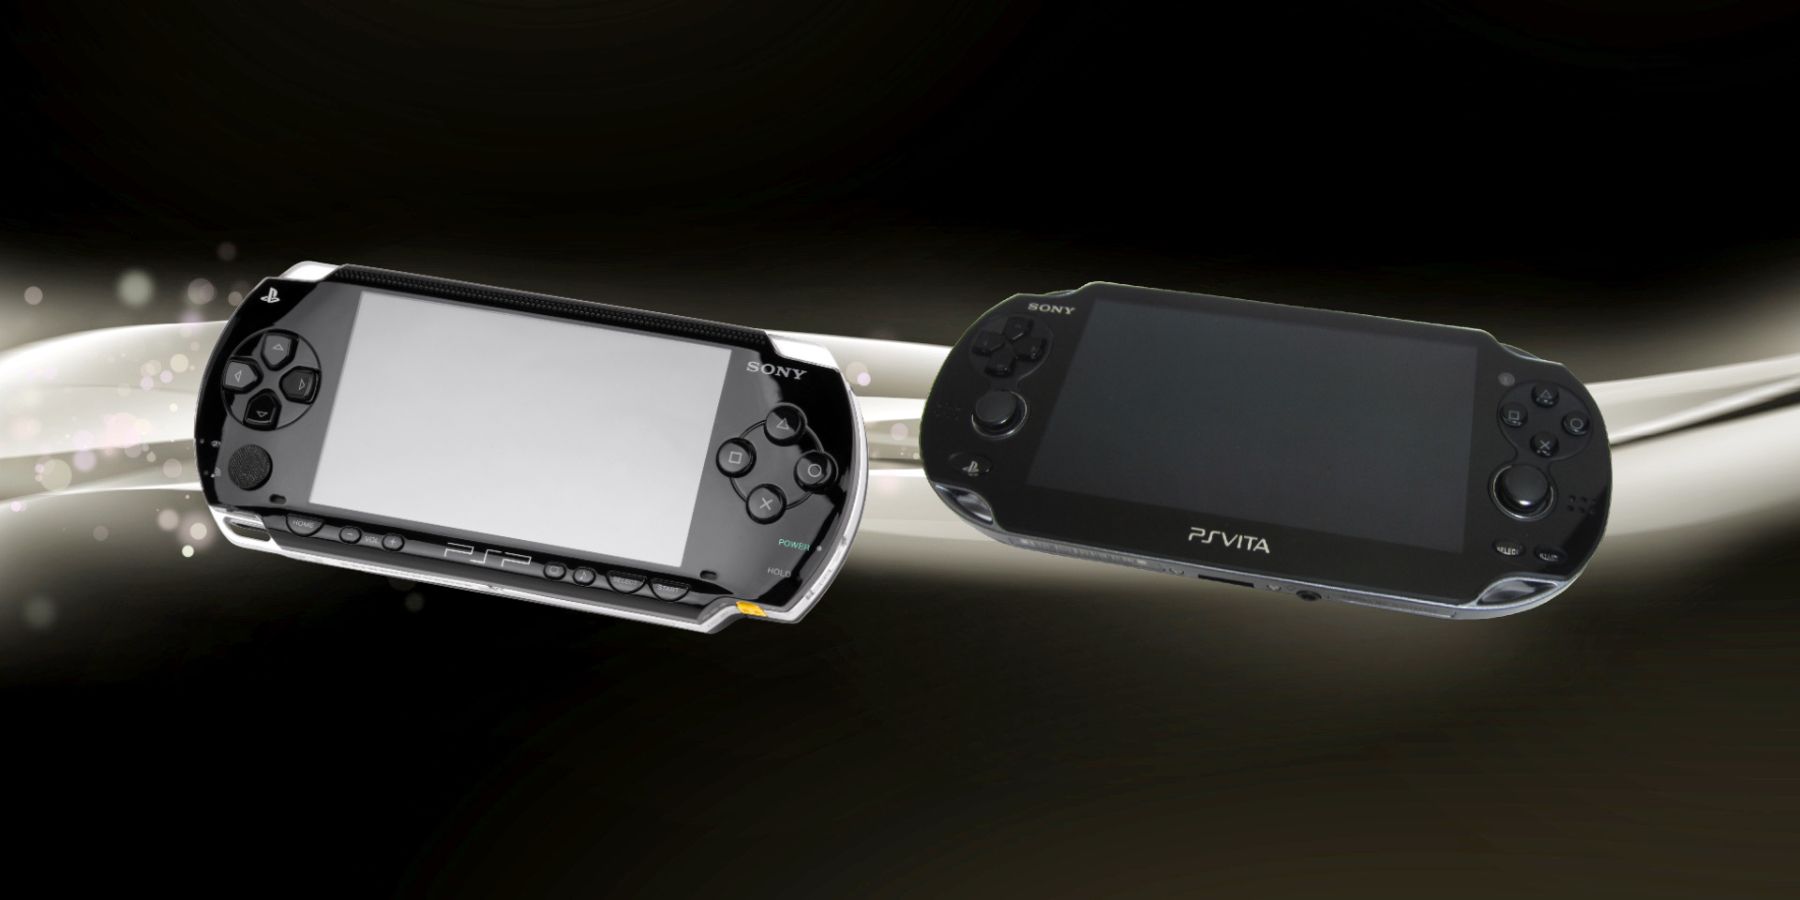 PSP & PS Vita Owners Shouldn't Update Their PS3 Firmware